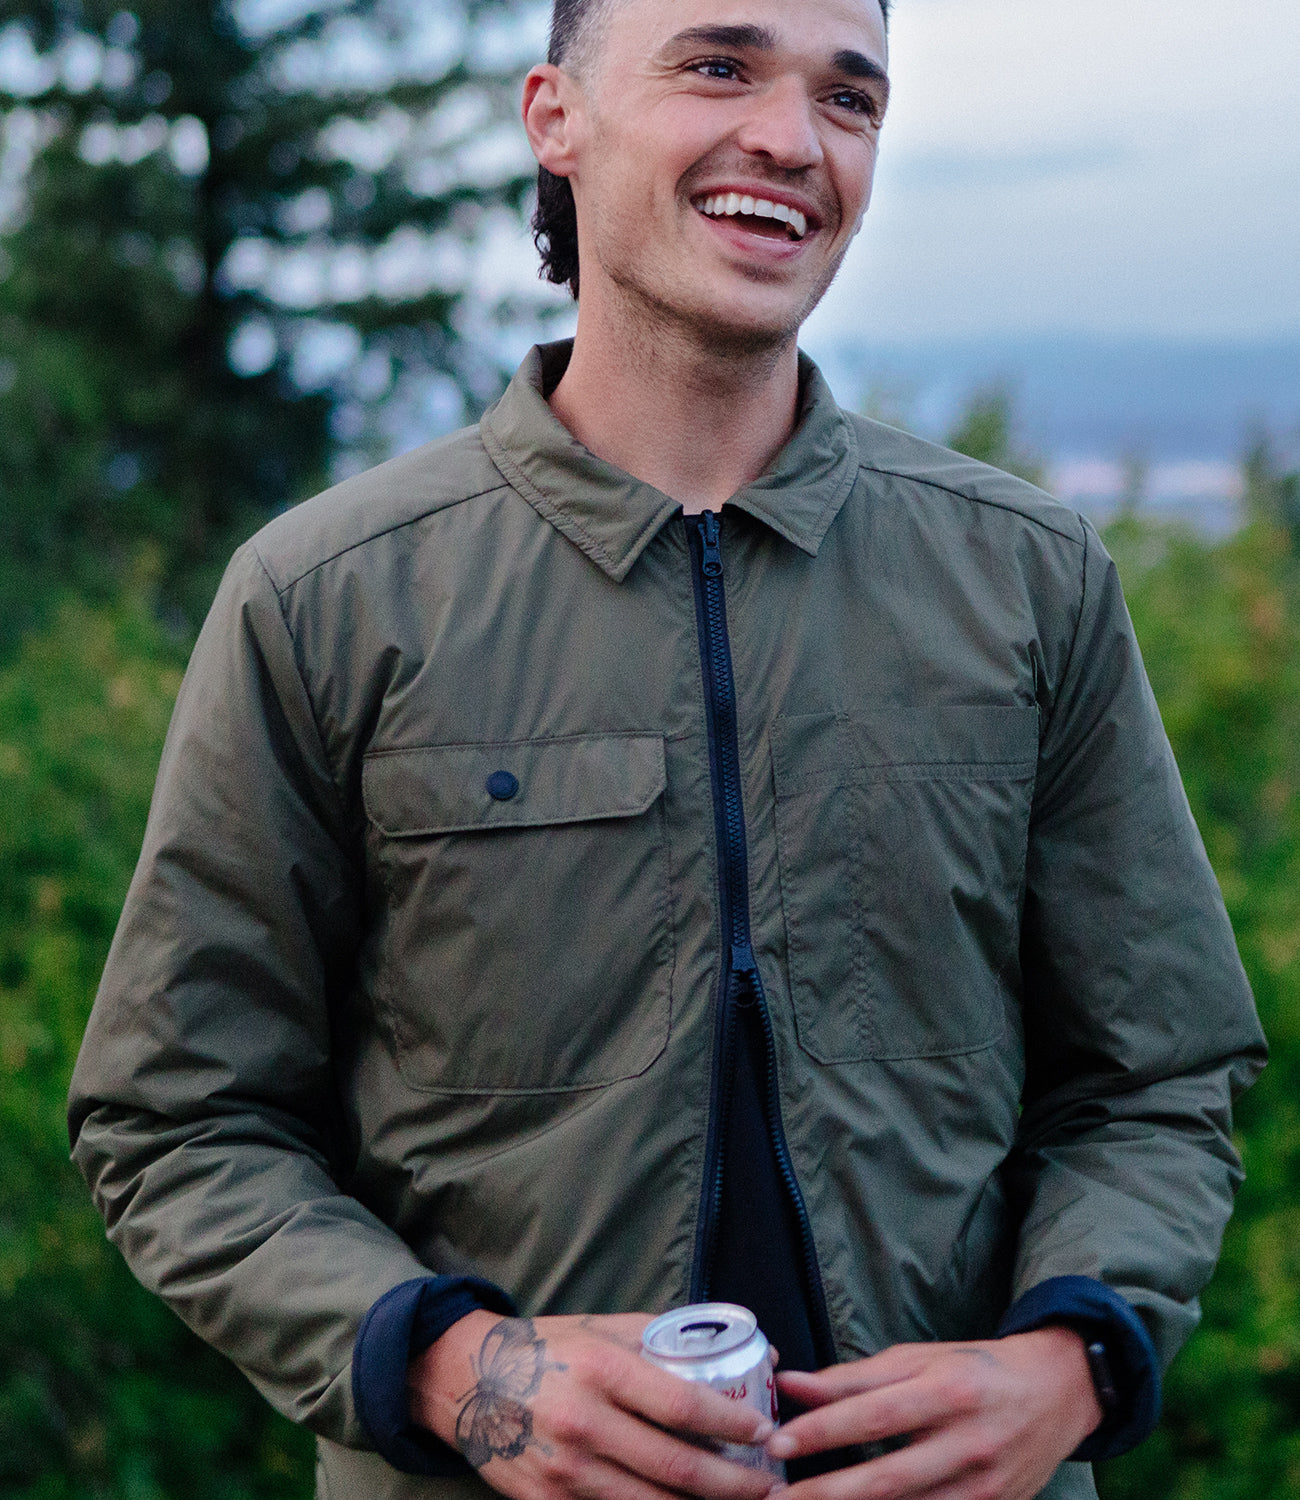 Reversible insulated jacket worn by a guy in the wild mobile size image